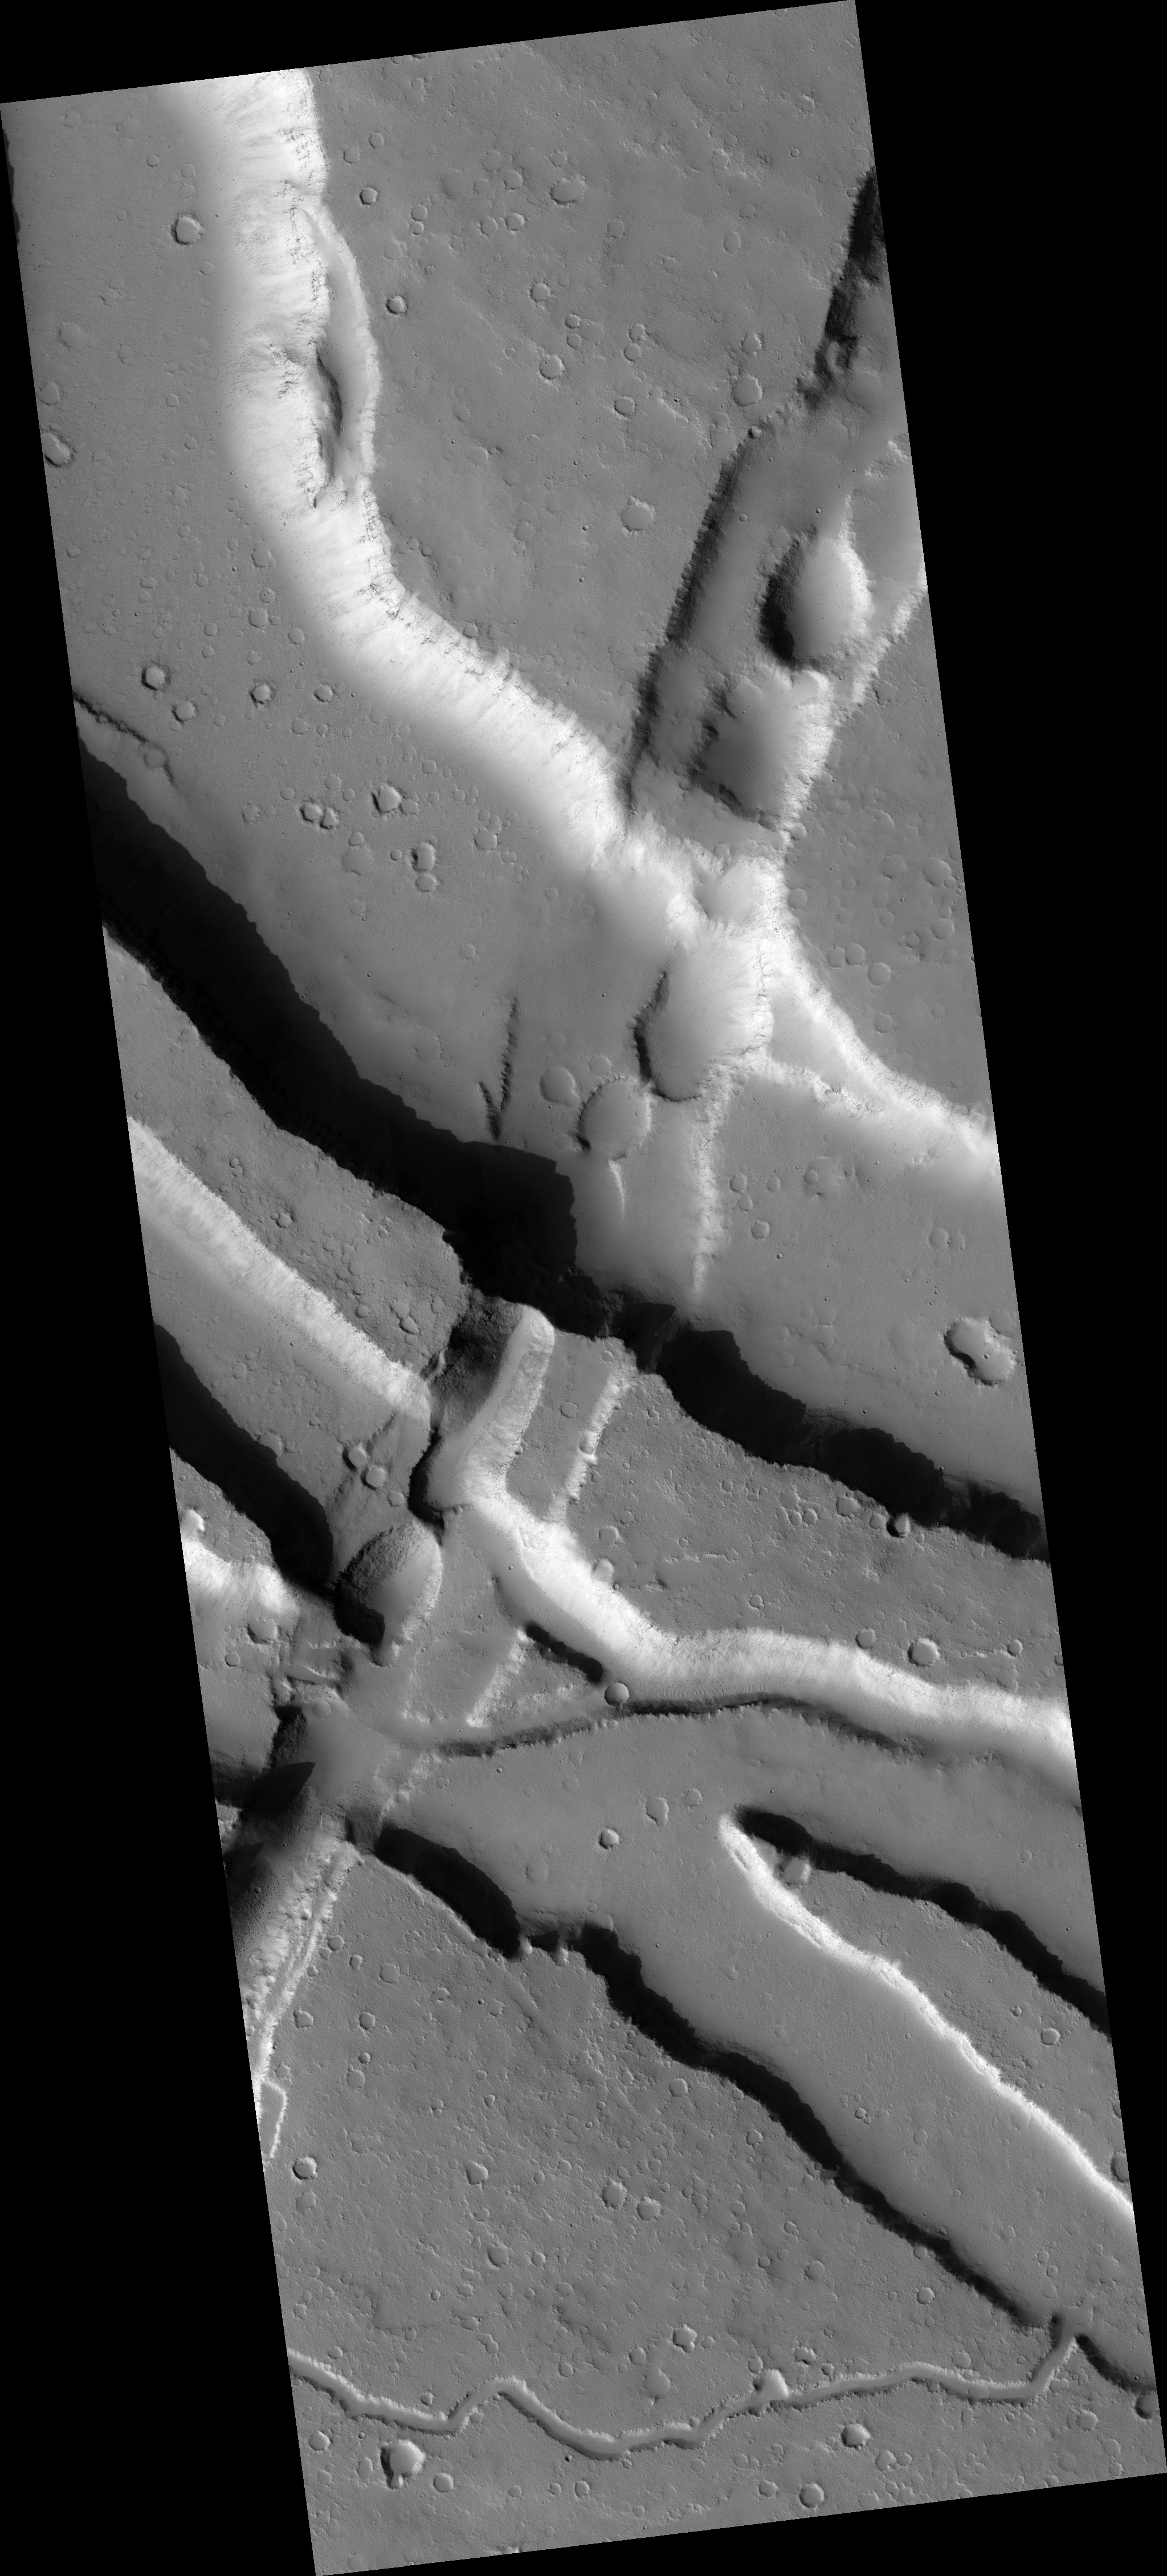 Faults and Channels on Elysium Mons